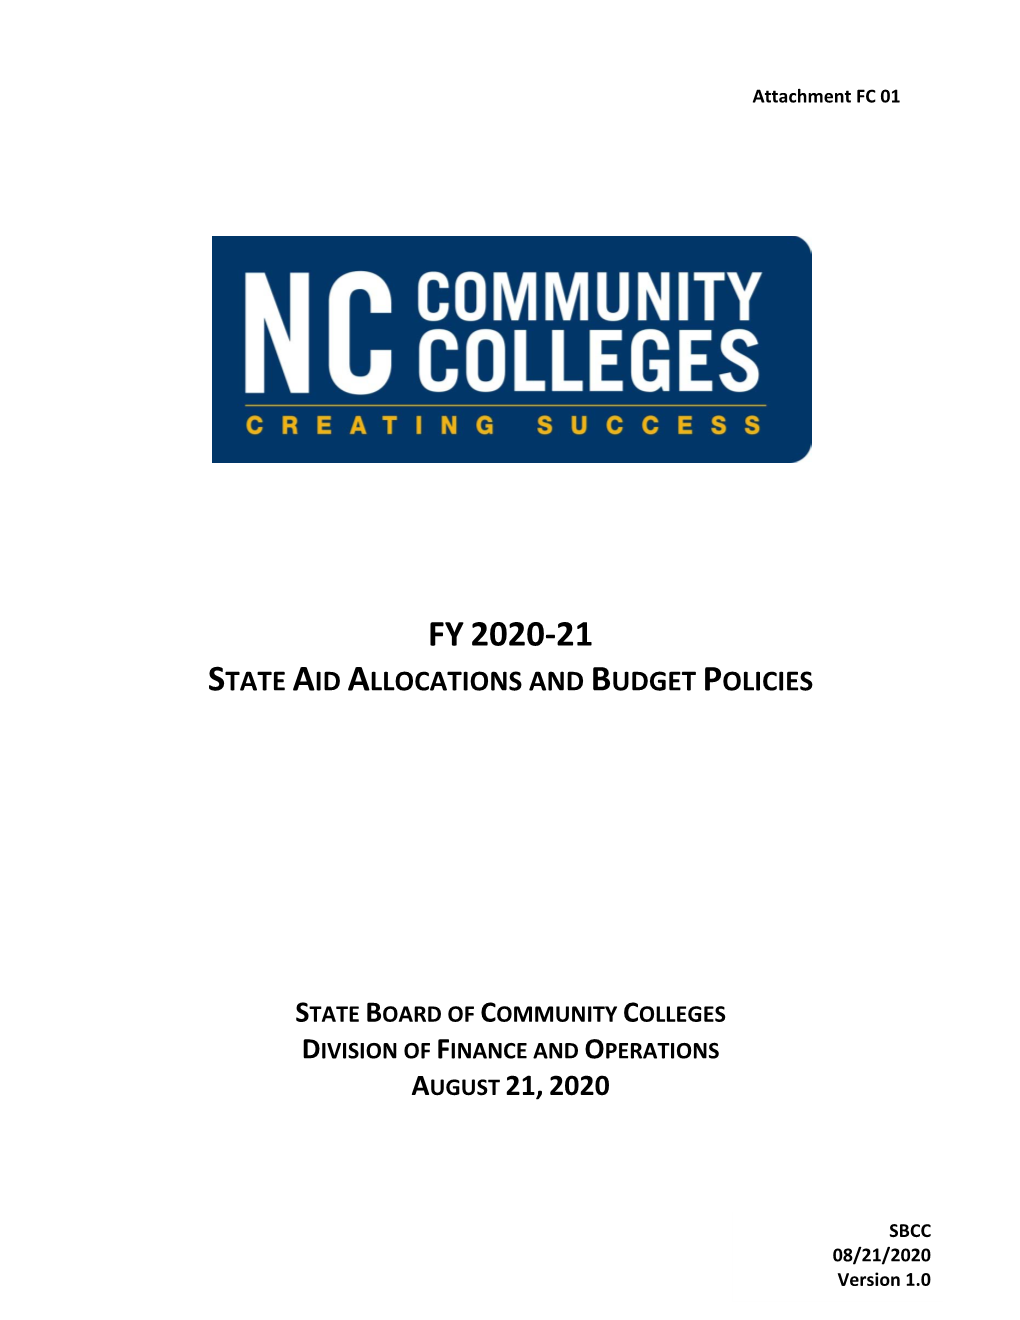 Fy 2020‐21 State Aid Allocations and Budget Policies